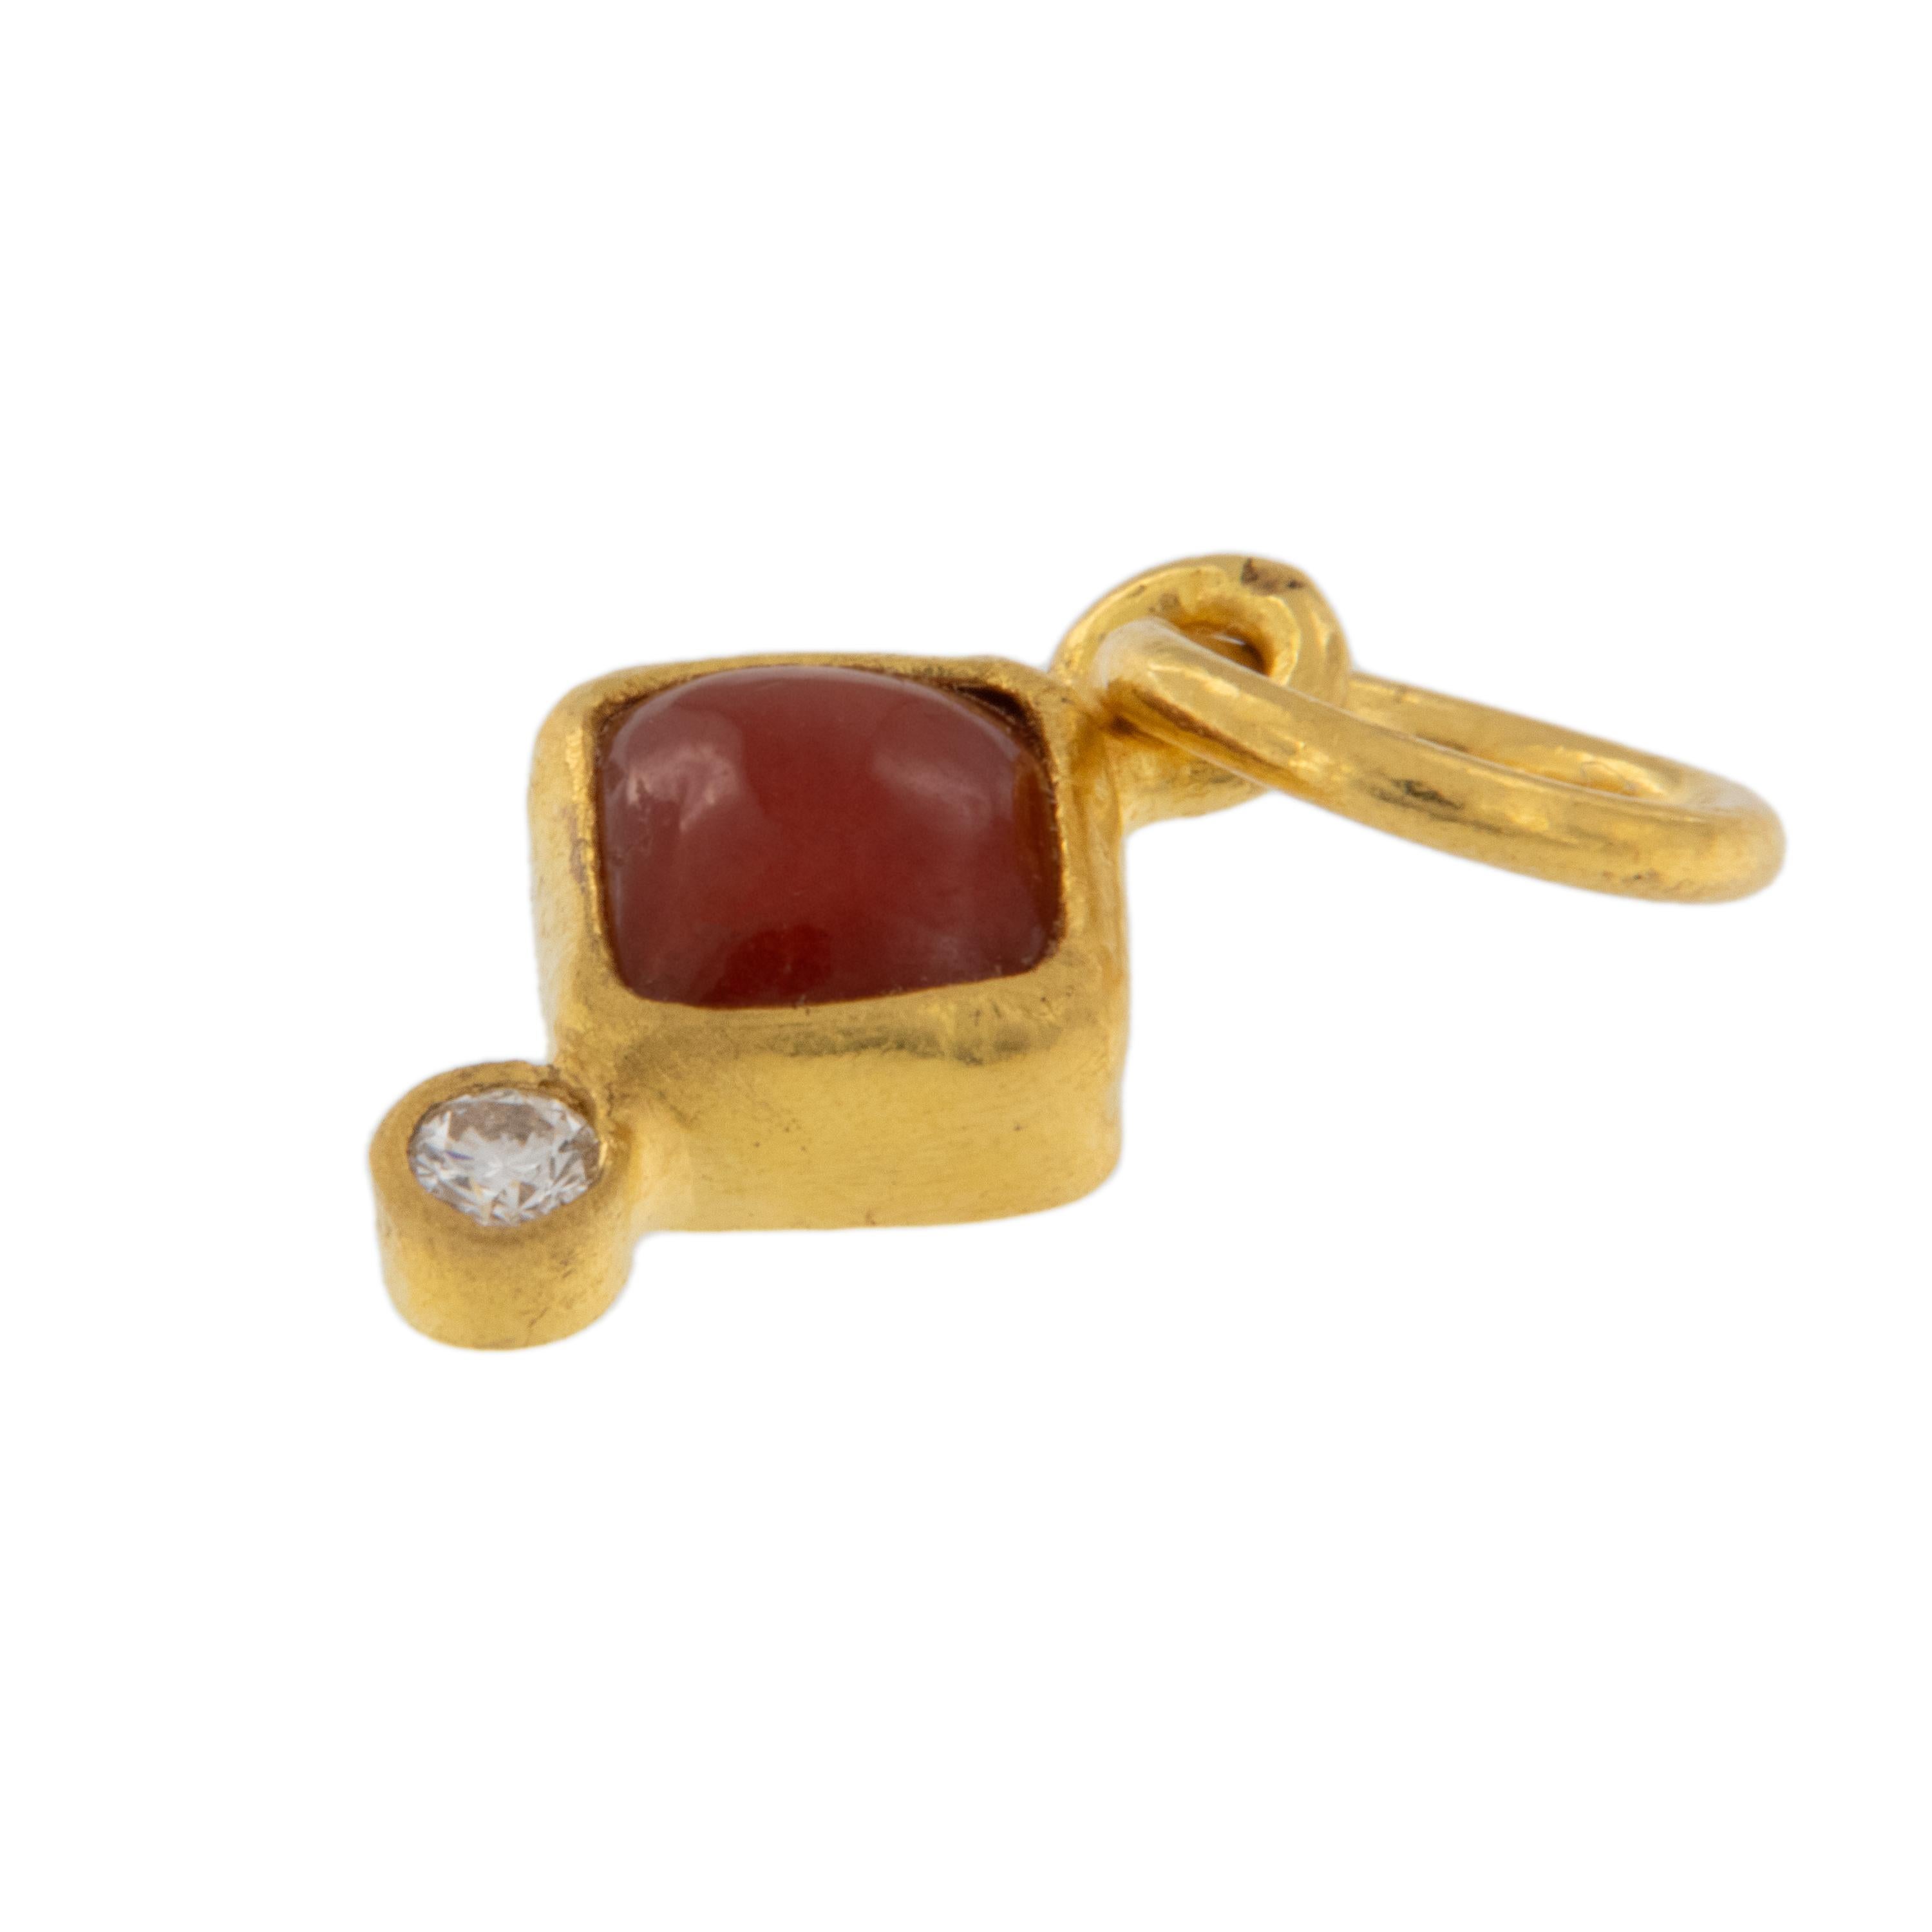 Rarest of all the golds, 24 karat gold is valued by all discerning investors. With it's unmistakable warm yellow color & textured finish this pendant / charm features a diamond shaped coral = 0.30 Carats perfectly punctuated with a round diamond =